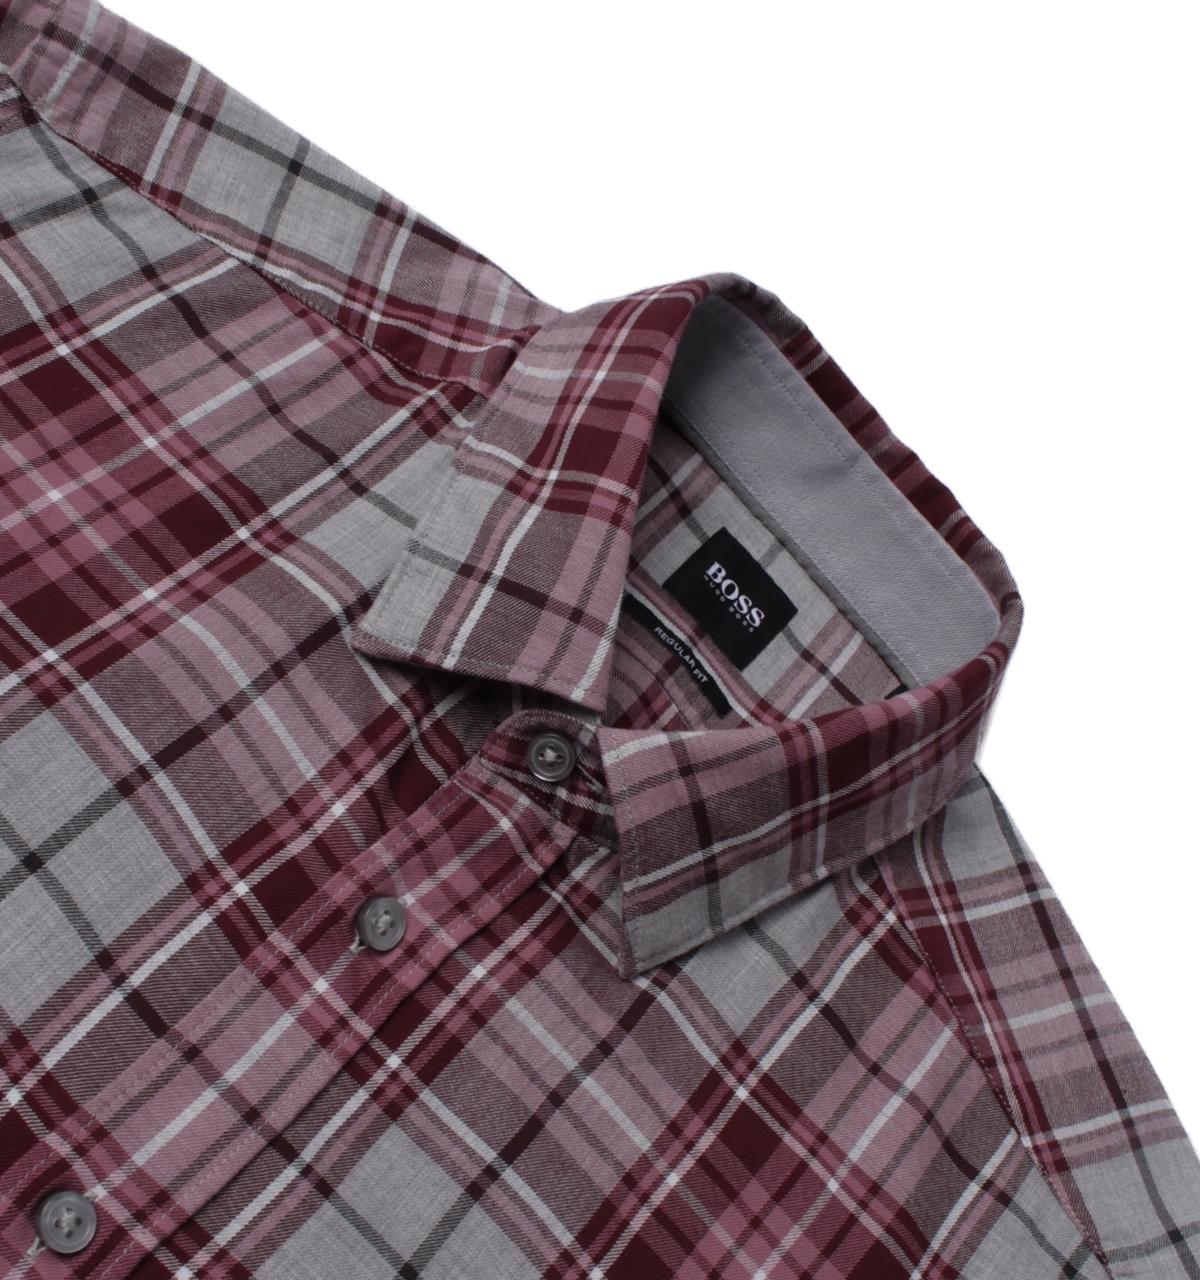 BOSS by Hugo Boss Lukas_51 Brushed Flannel Pink Check Shirt for Men - Lyst